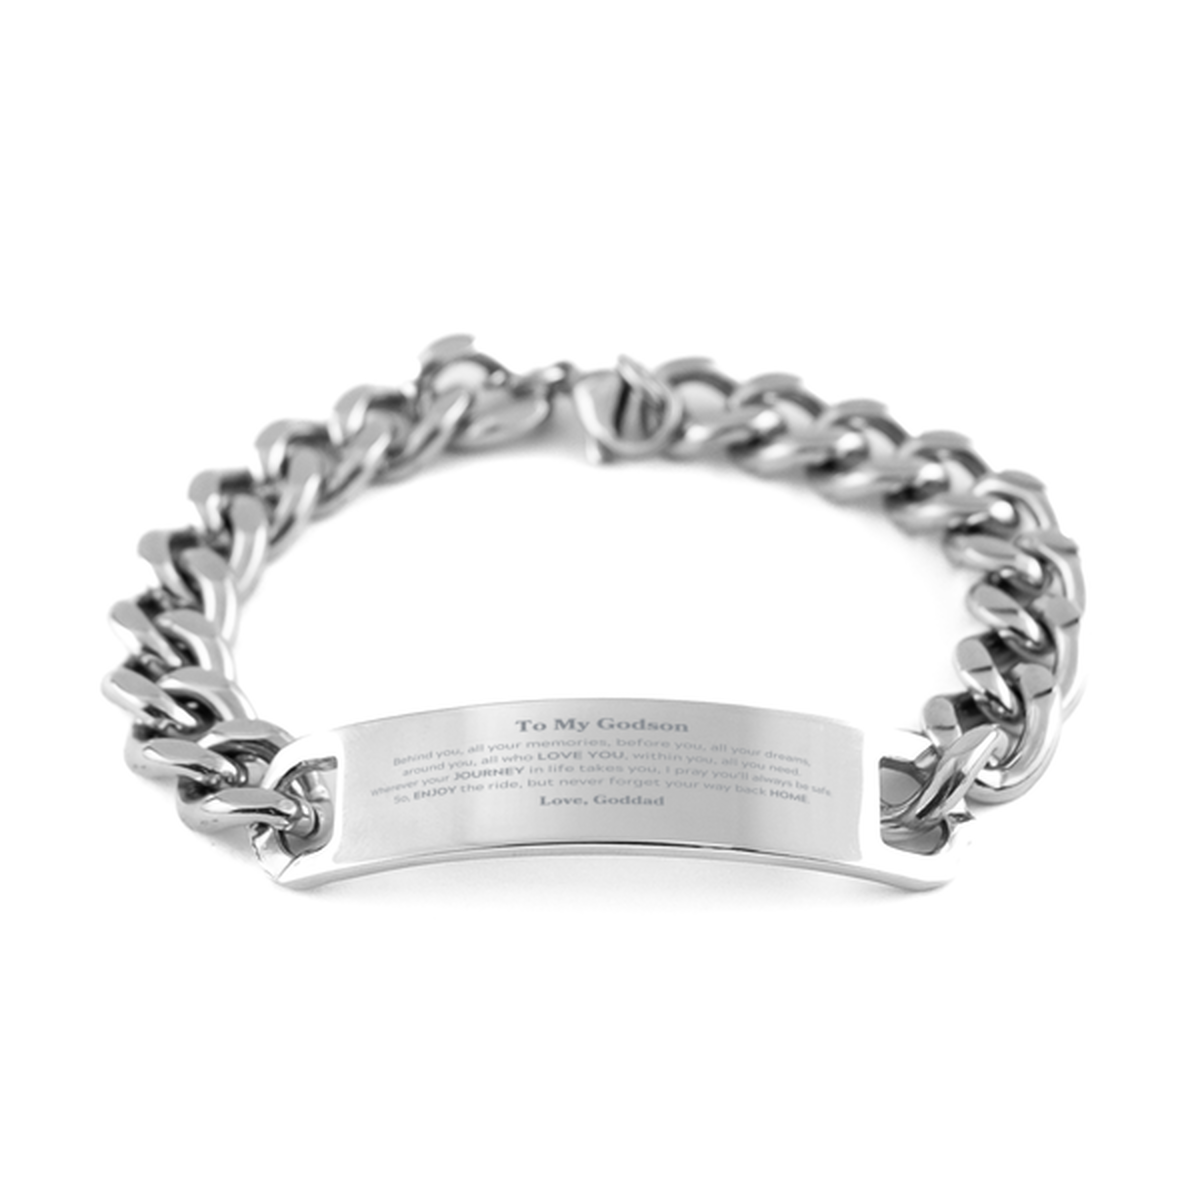 To My Godson Graduation Gifts from Goddad, Godson Cuban Chain Stainless Steel Bracelet Christmas Birthday Gifts for Godson Behind you, all your memories, before you, all your dreams. Love, Goddad